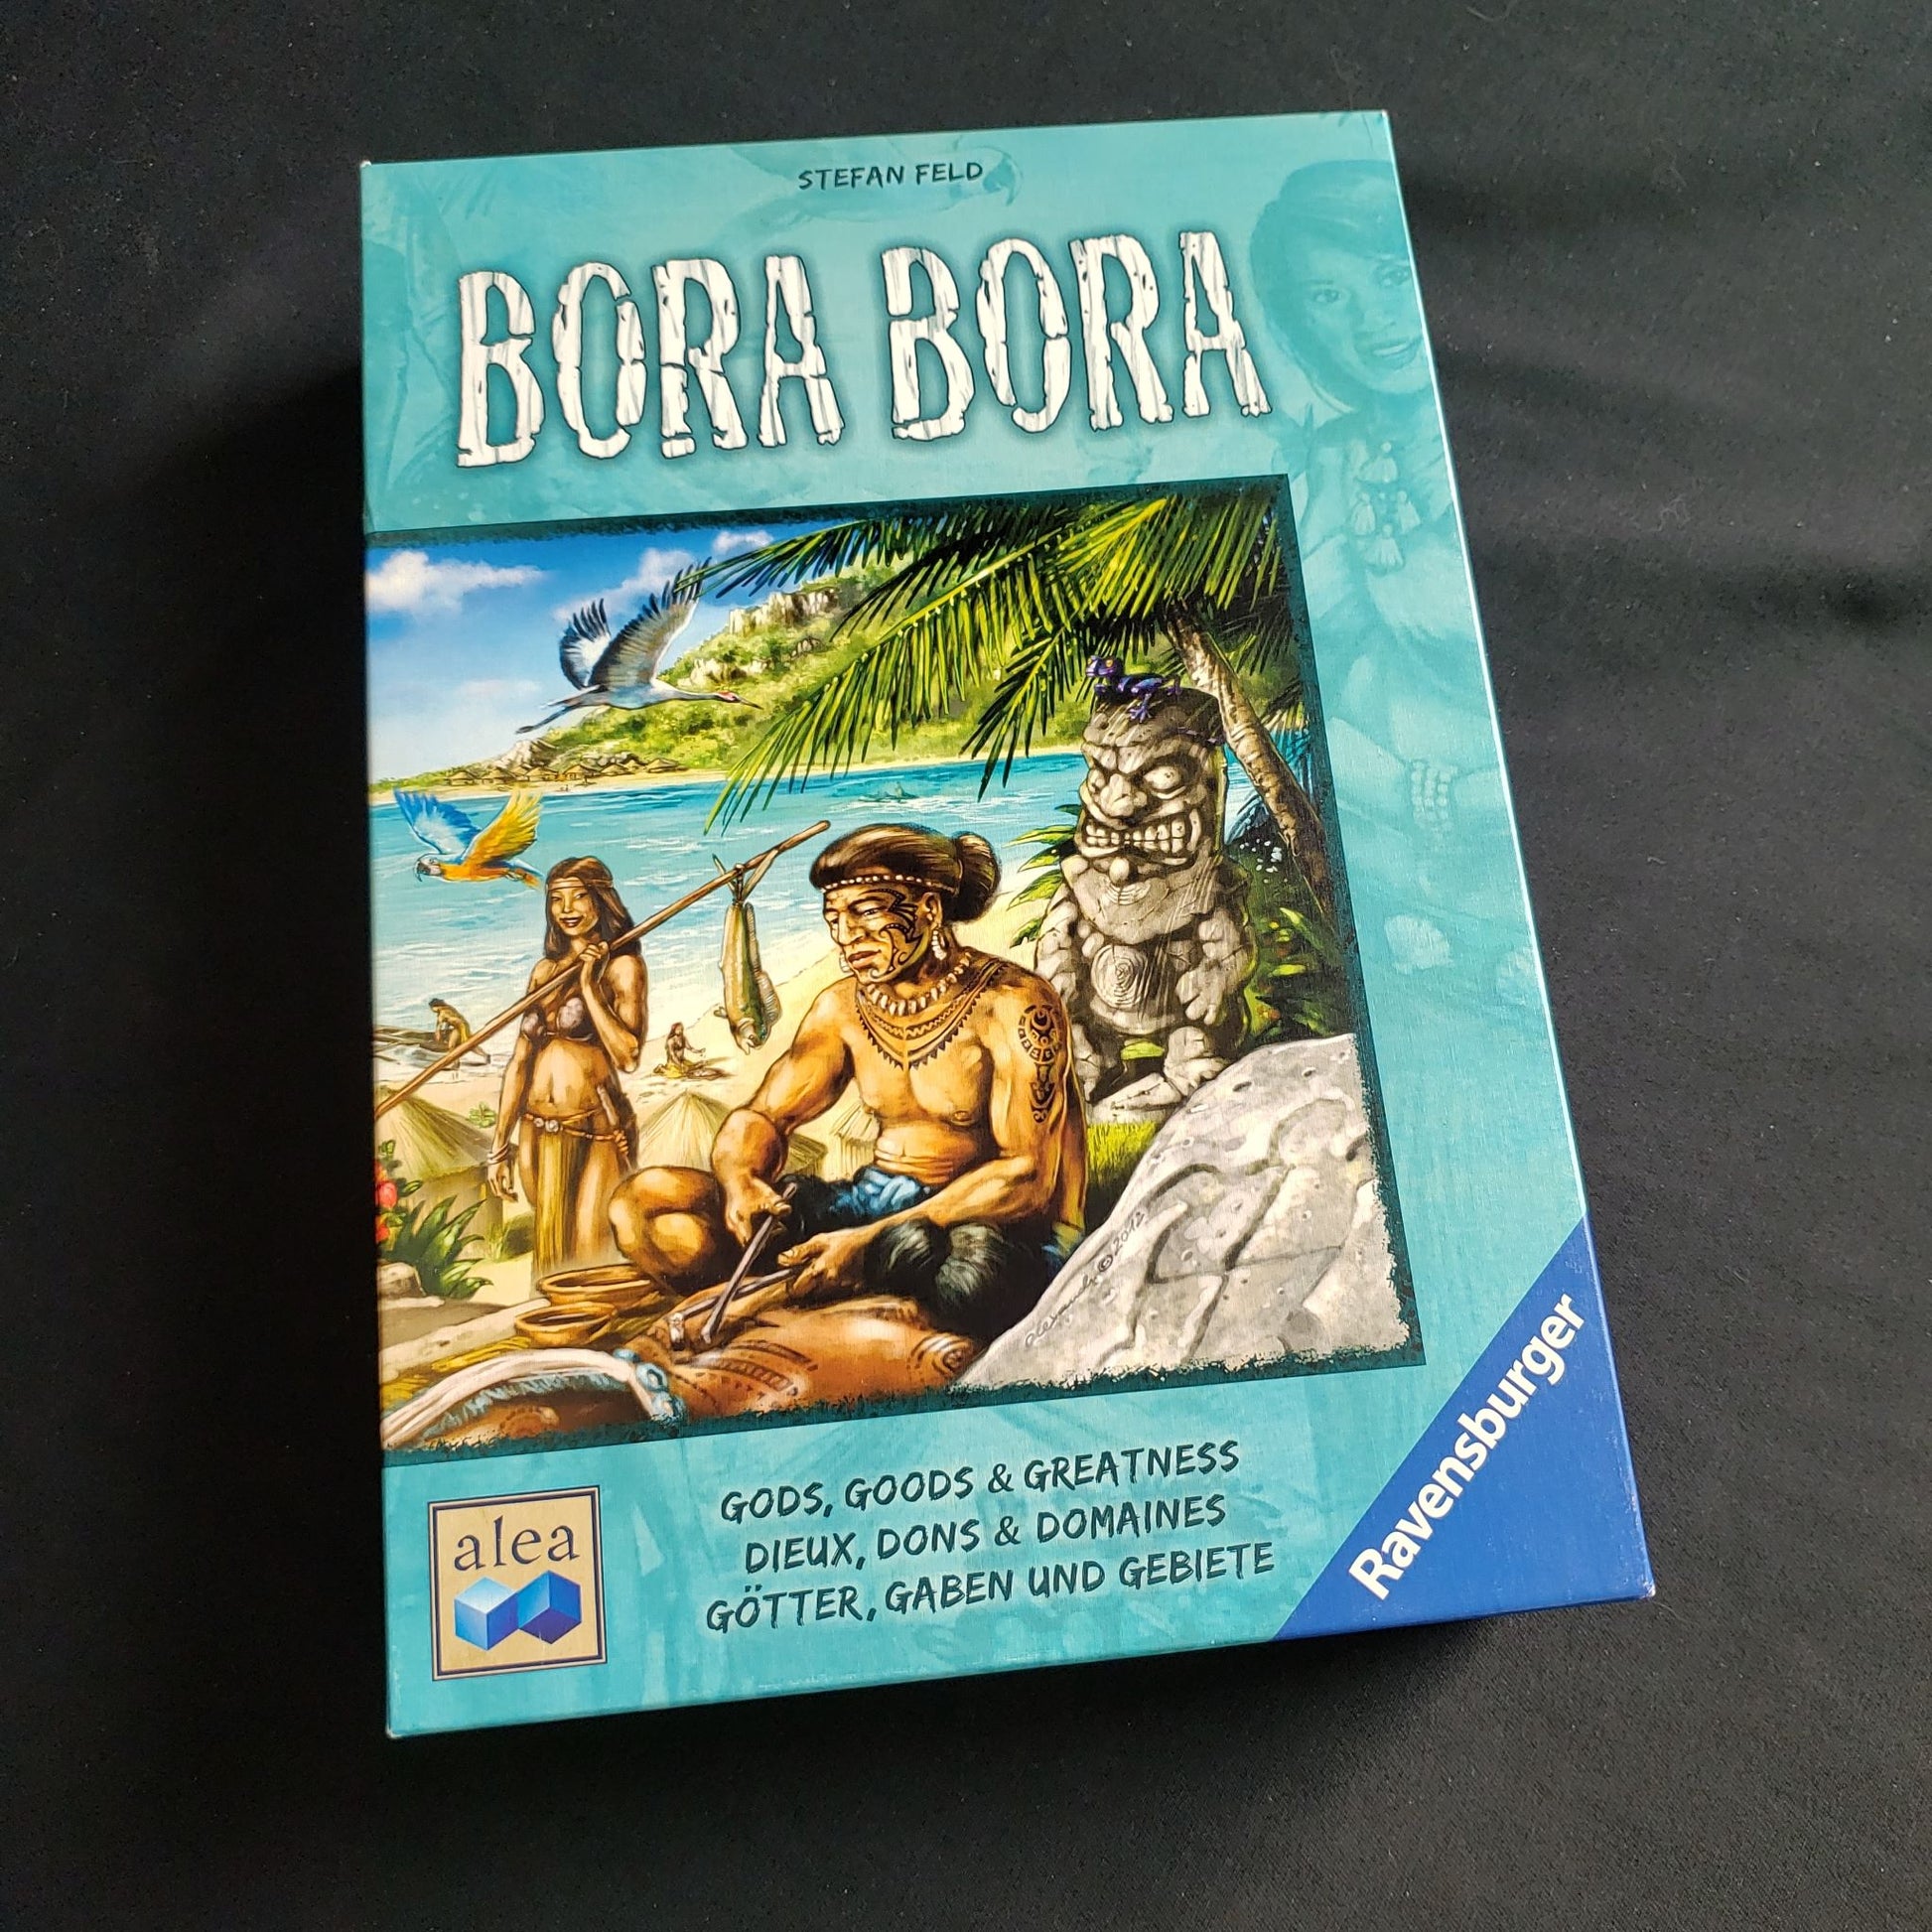 Image shows the front cover of the box of the Bora Bora board game